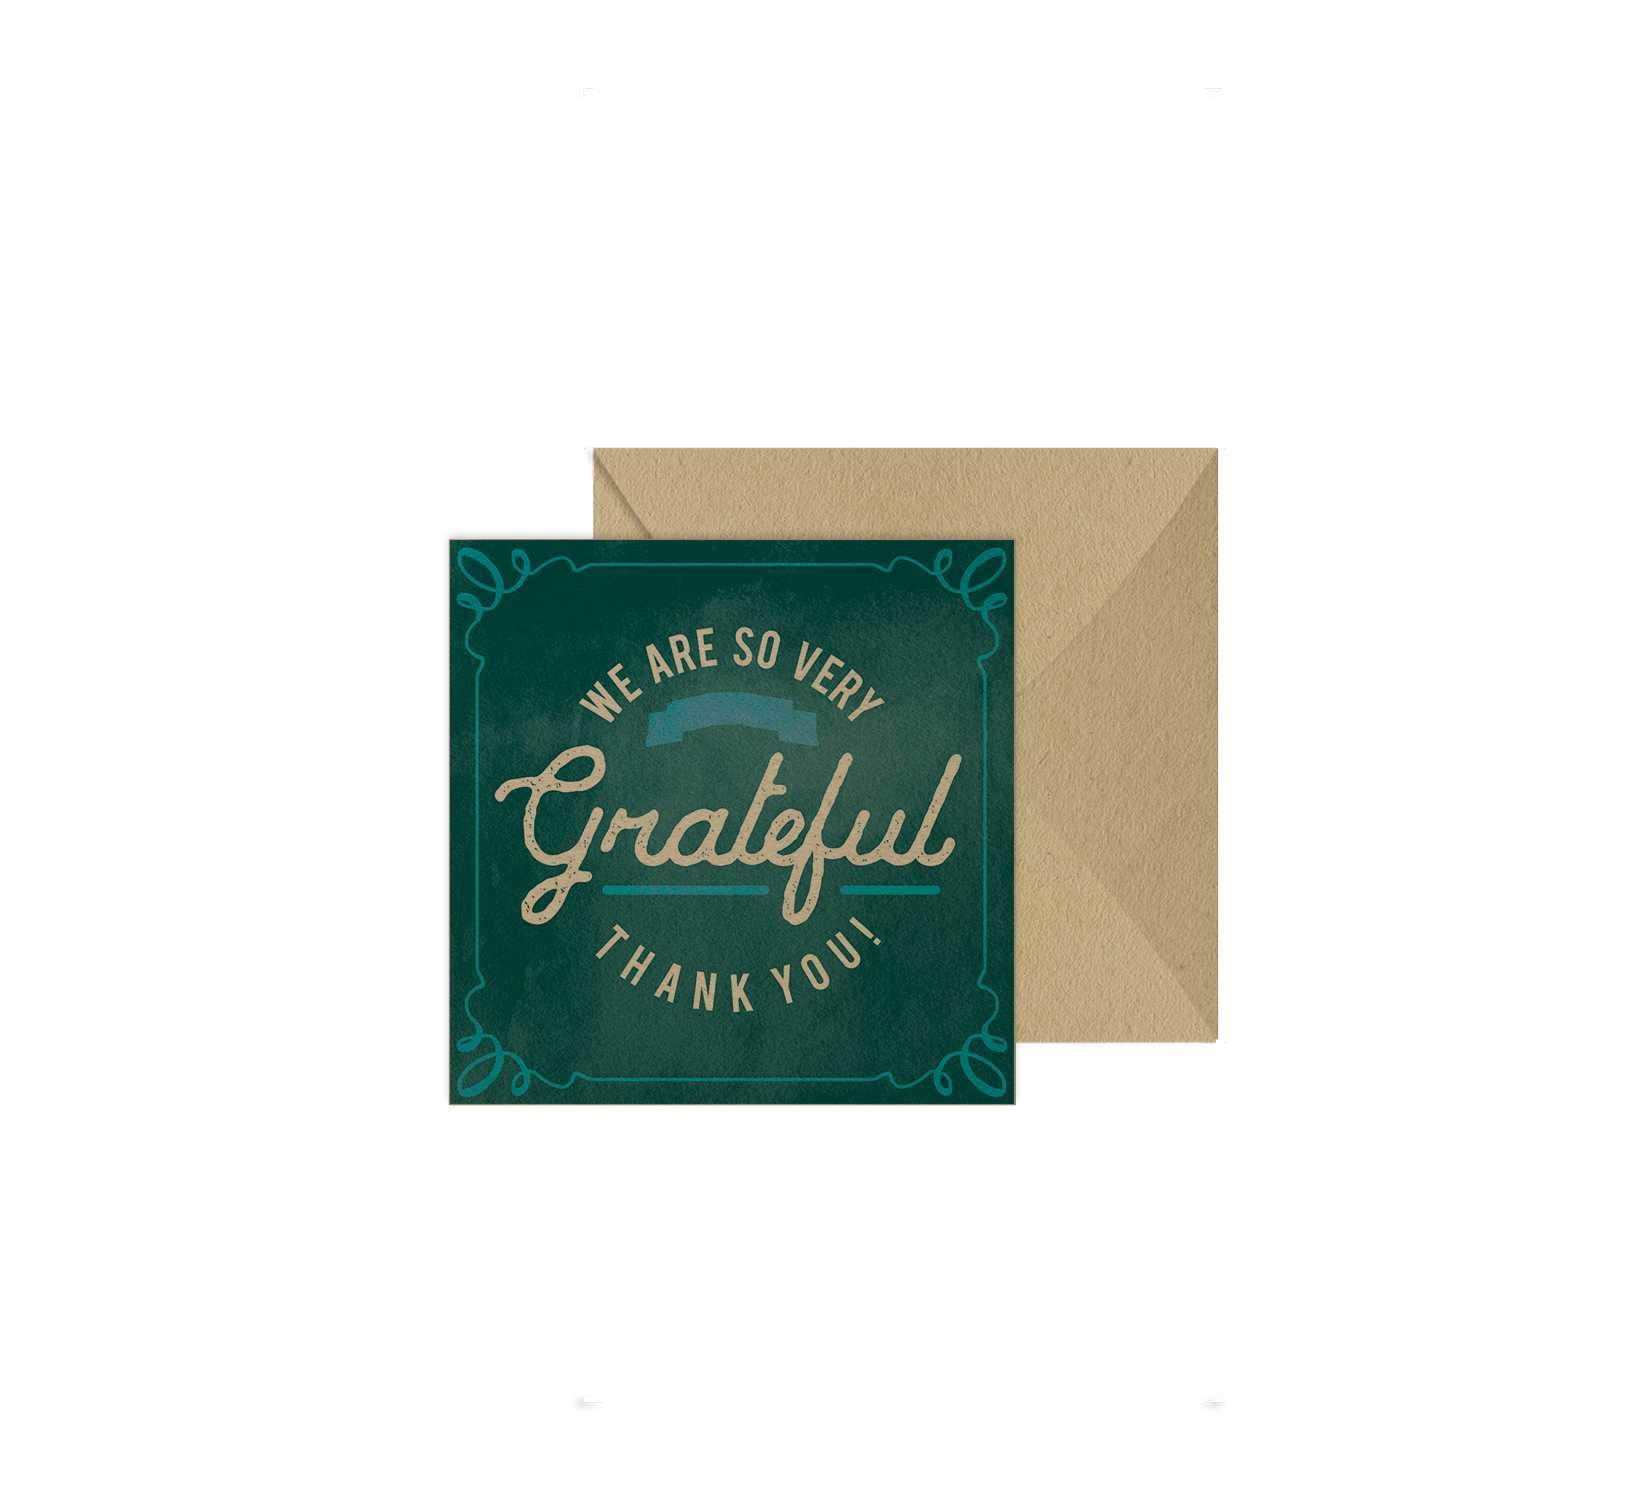 We Are so Very Grateful Blank Card Set